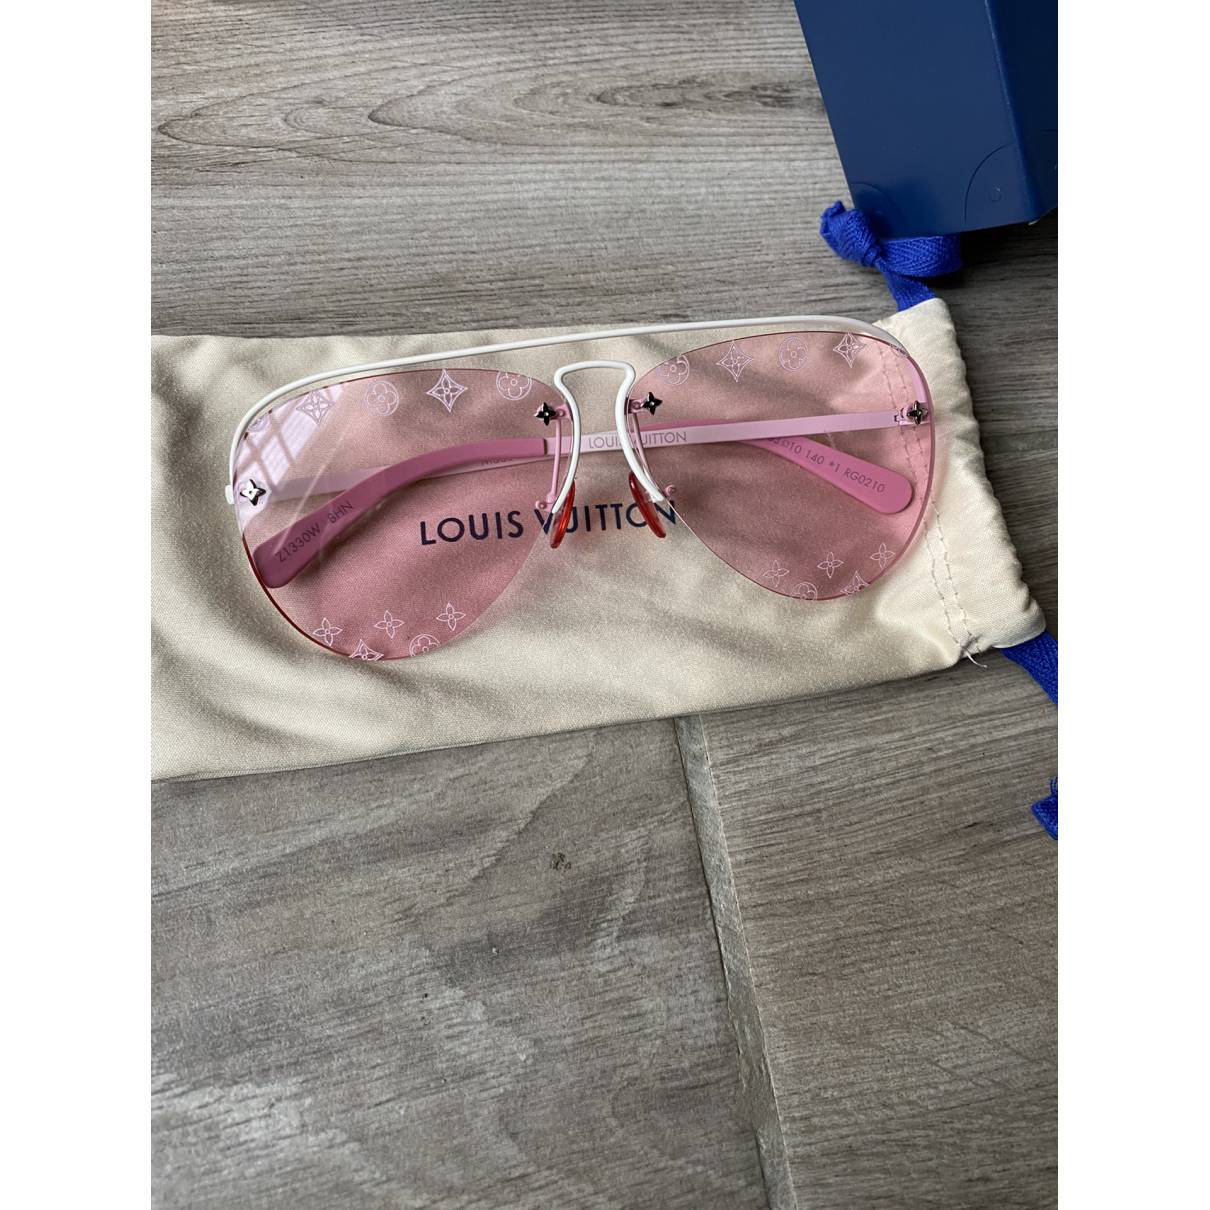 Aviator sunglasses Louis Vuitton Pink in Other - 22159661